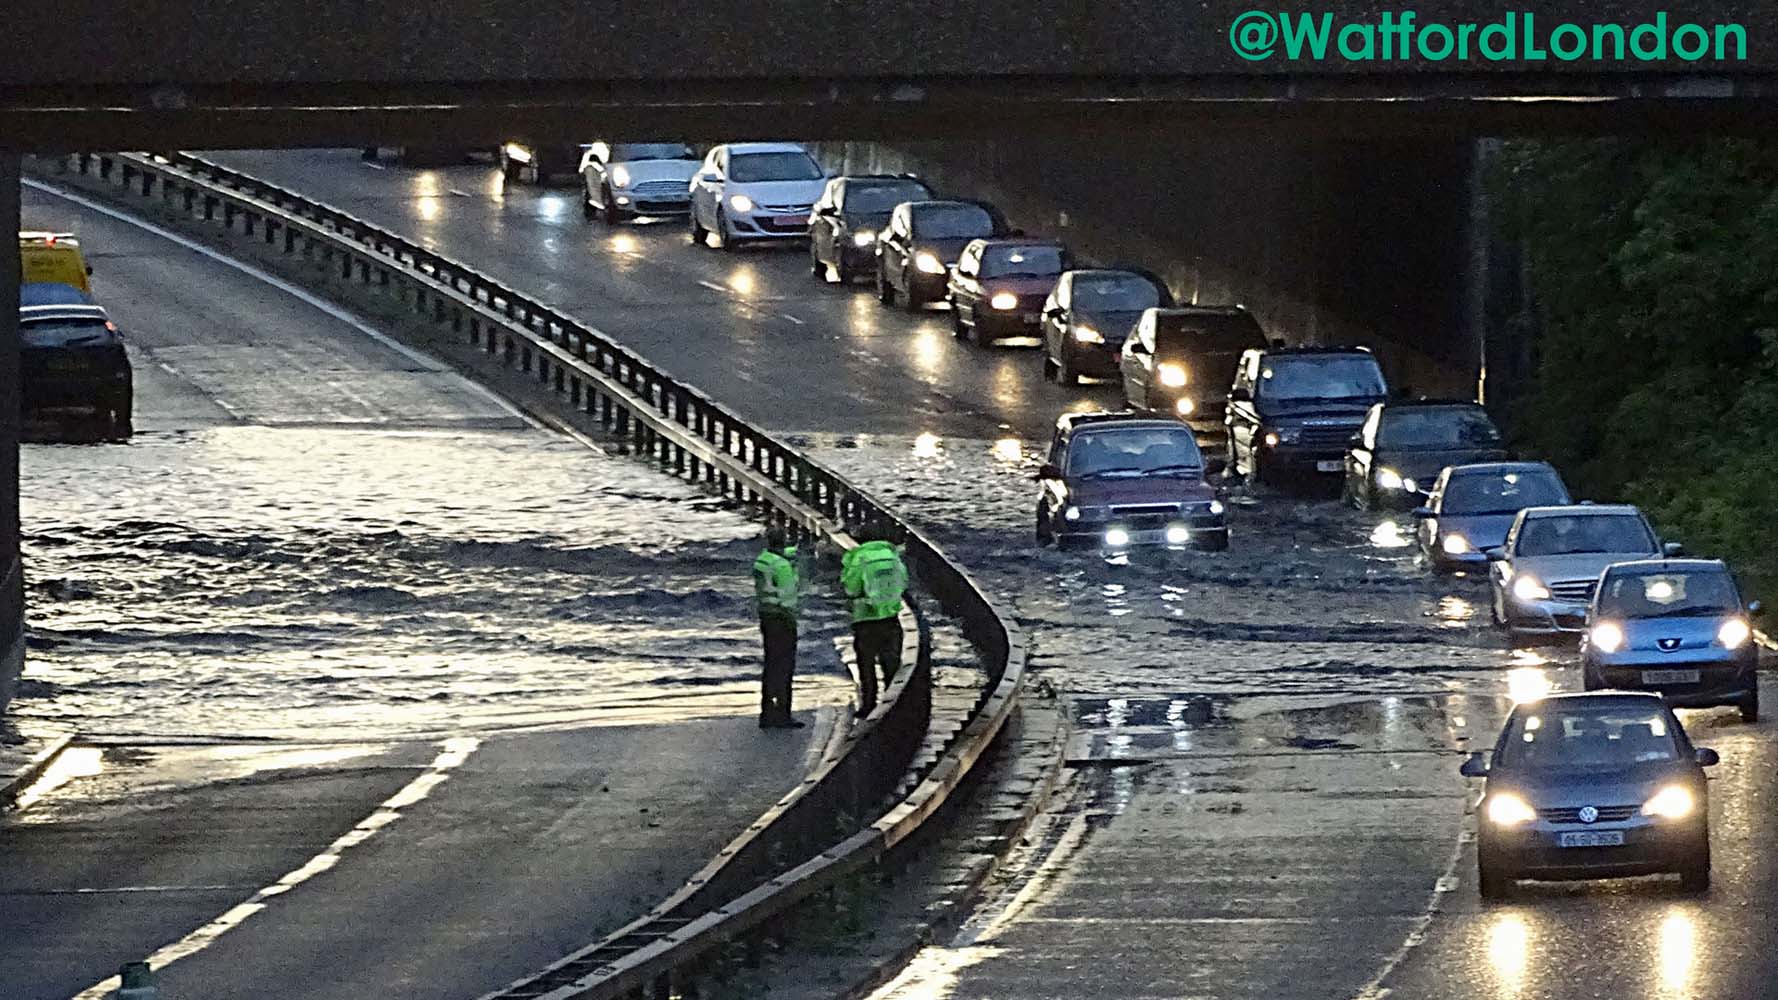 Watford A41 flooding into a river as heavy rain downpour video